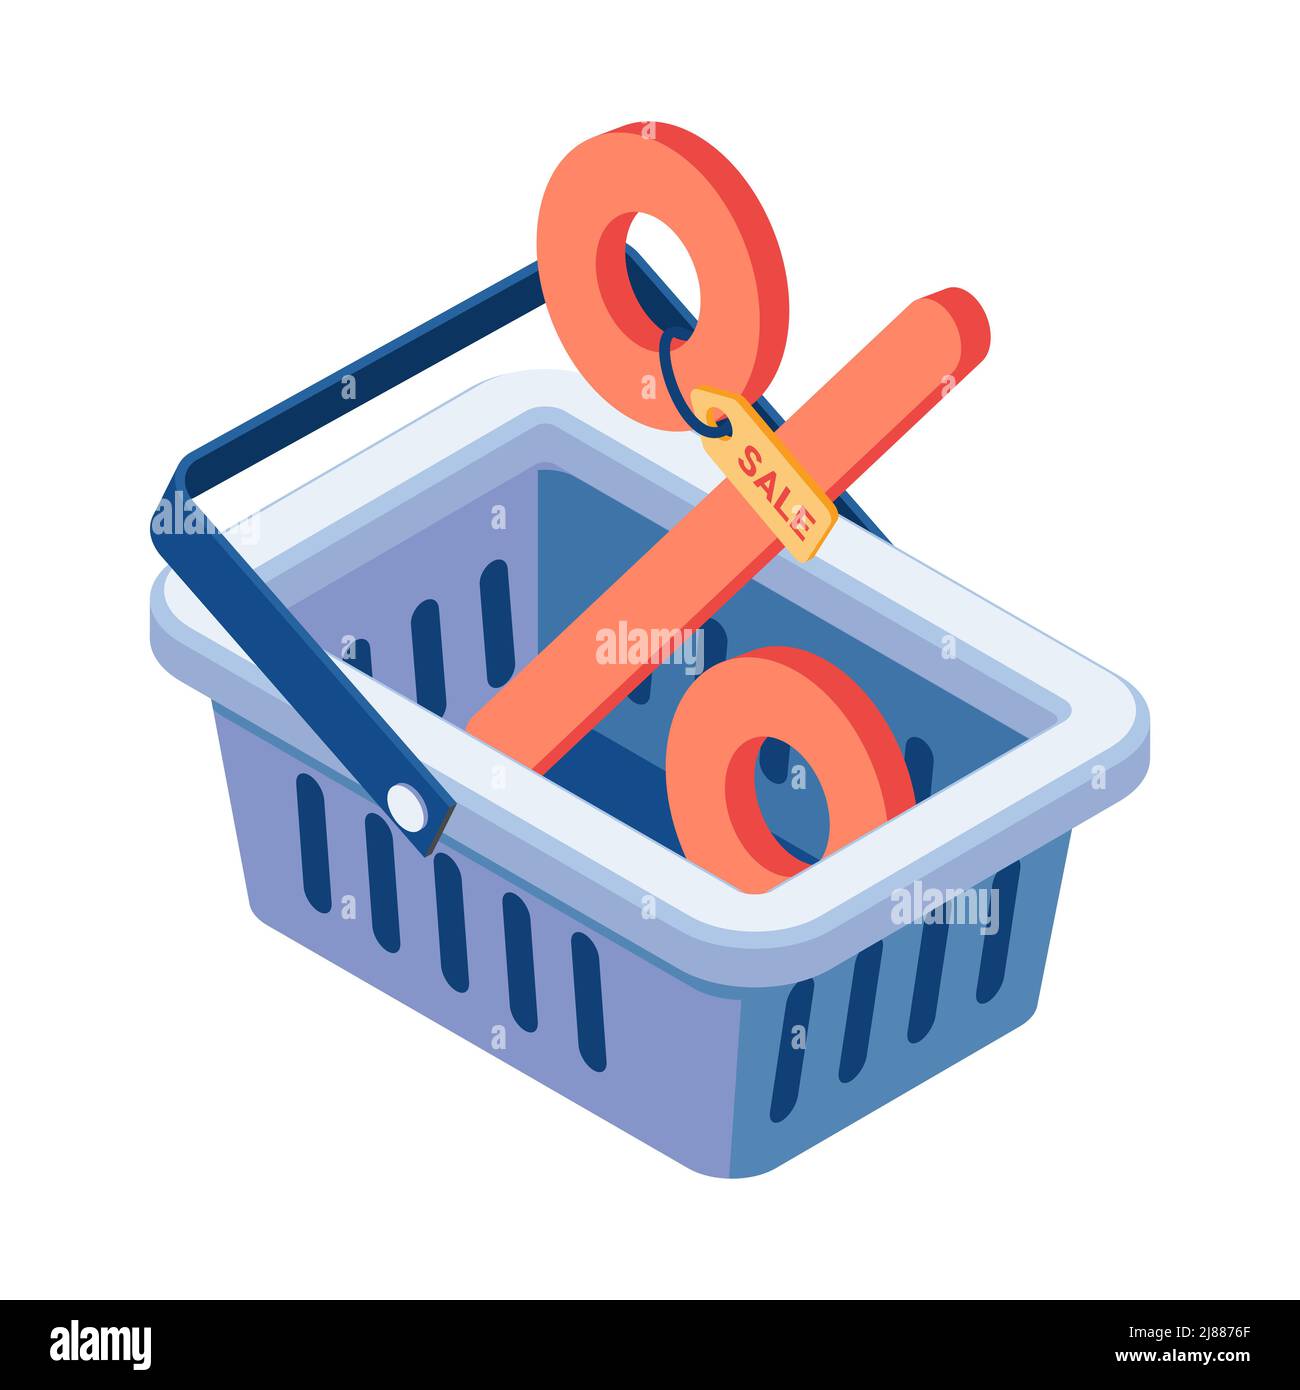 Flat 3d Isometric Red Percentage Sign in Shopping Basket. Marketing Concept. Stock Vector